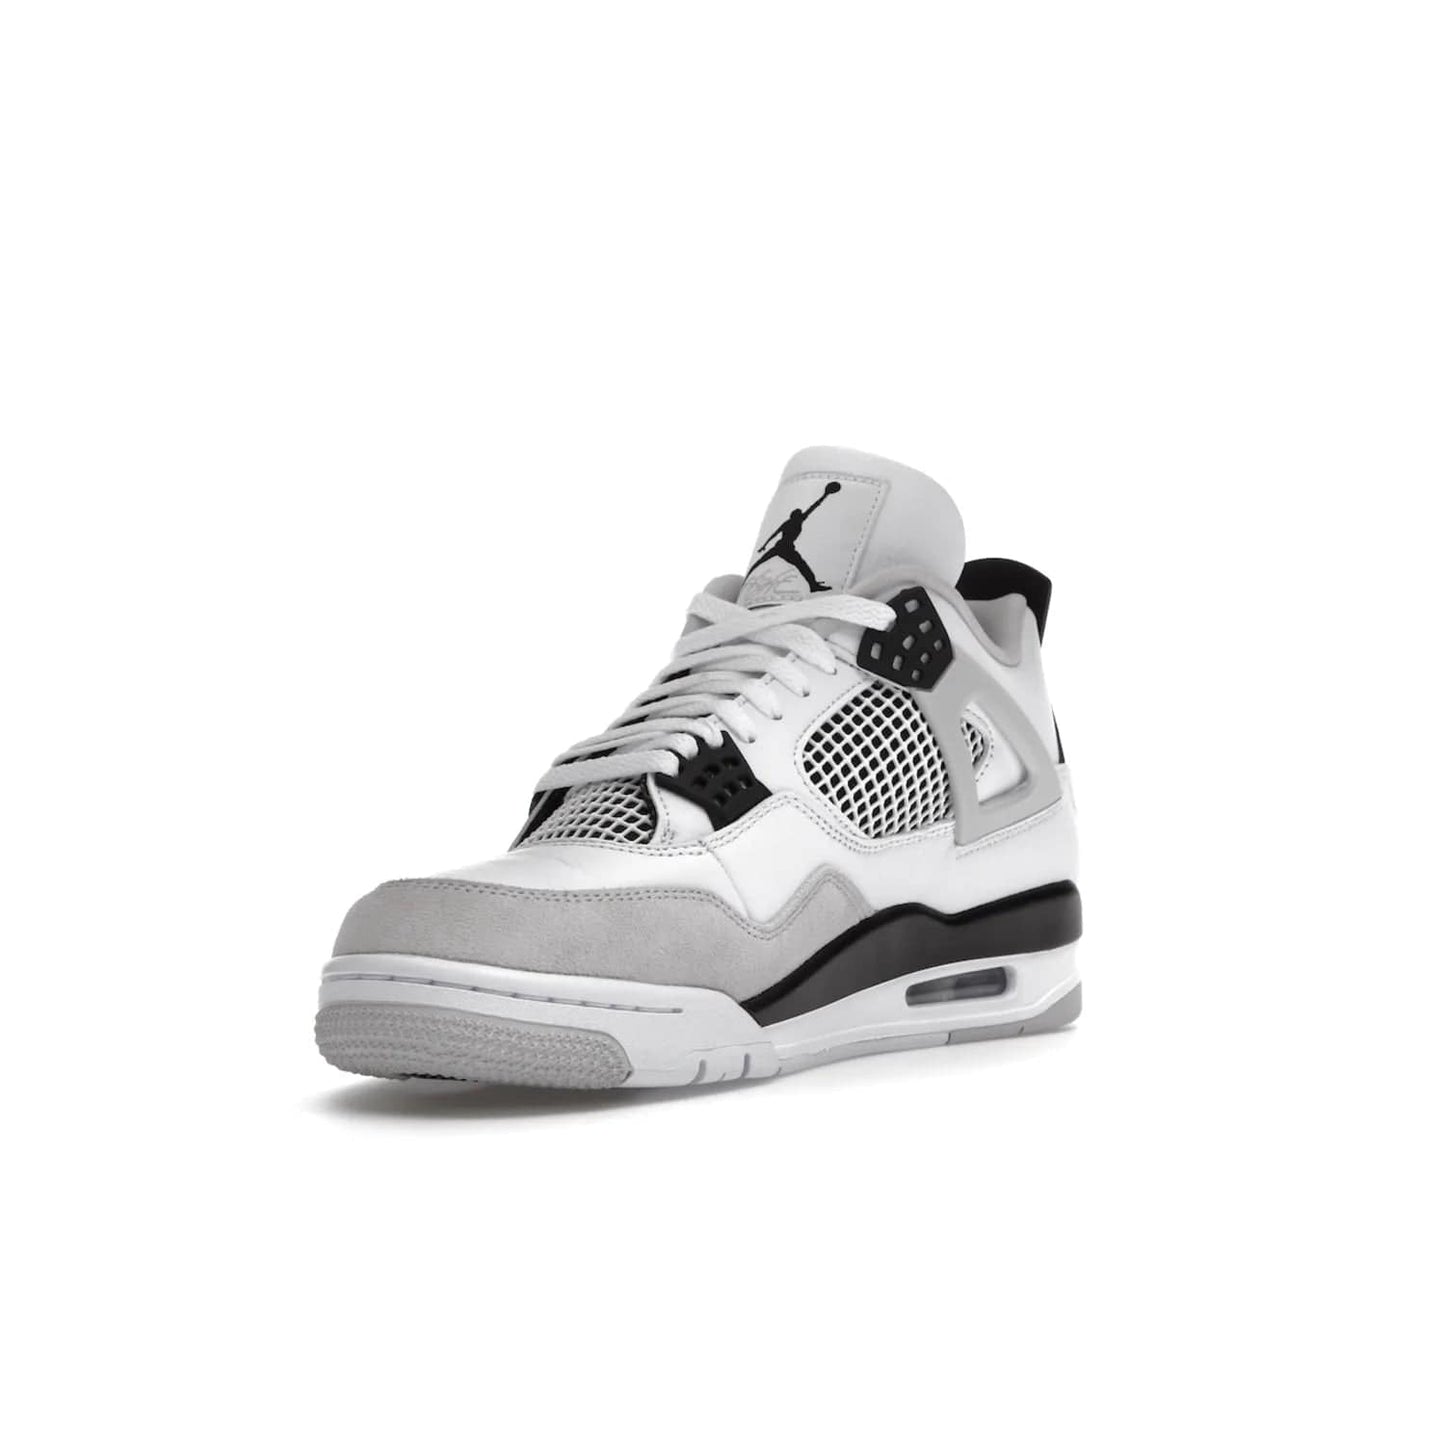 Jordan 4 Retro Military Black - Image 14 - Only at www.BallersClubKickz.com - Updated Air Jordan 4 style with a white/black/light grey sole and visible Air unit. Released in May 2022, offering timeless classic style and comfort.